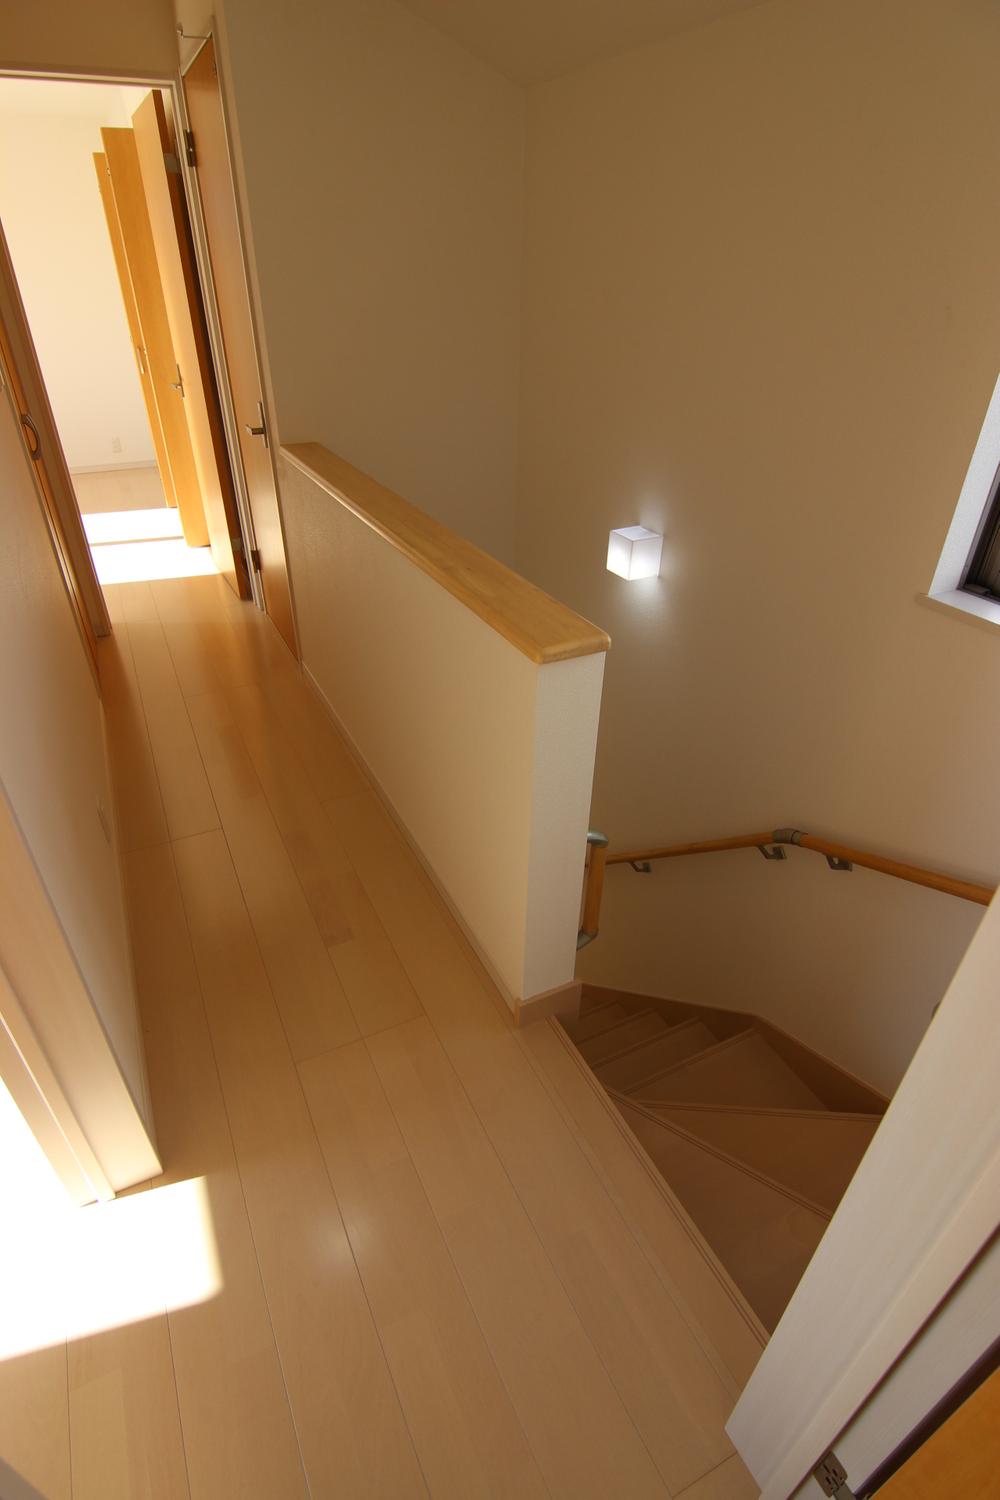 Other introspection. Established a safe handrail to the stairs